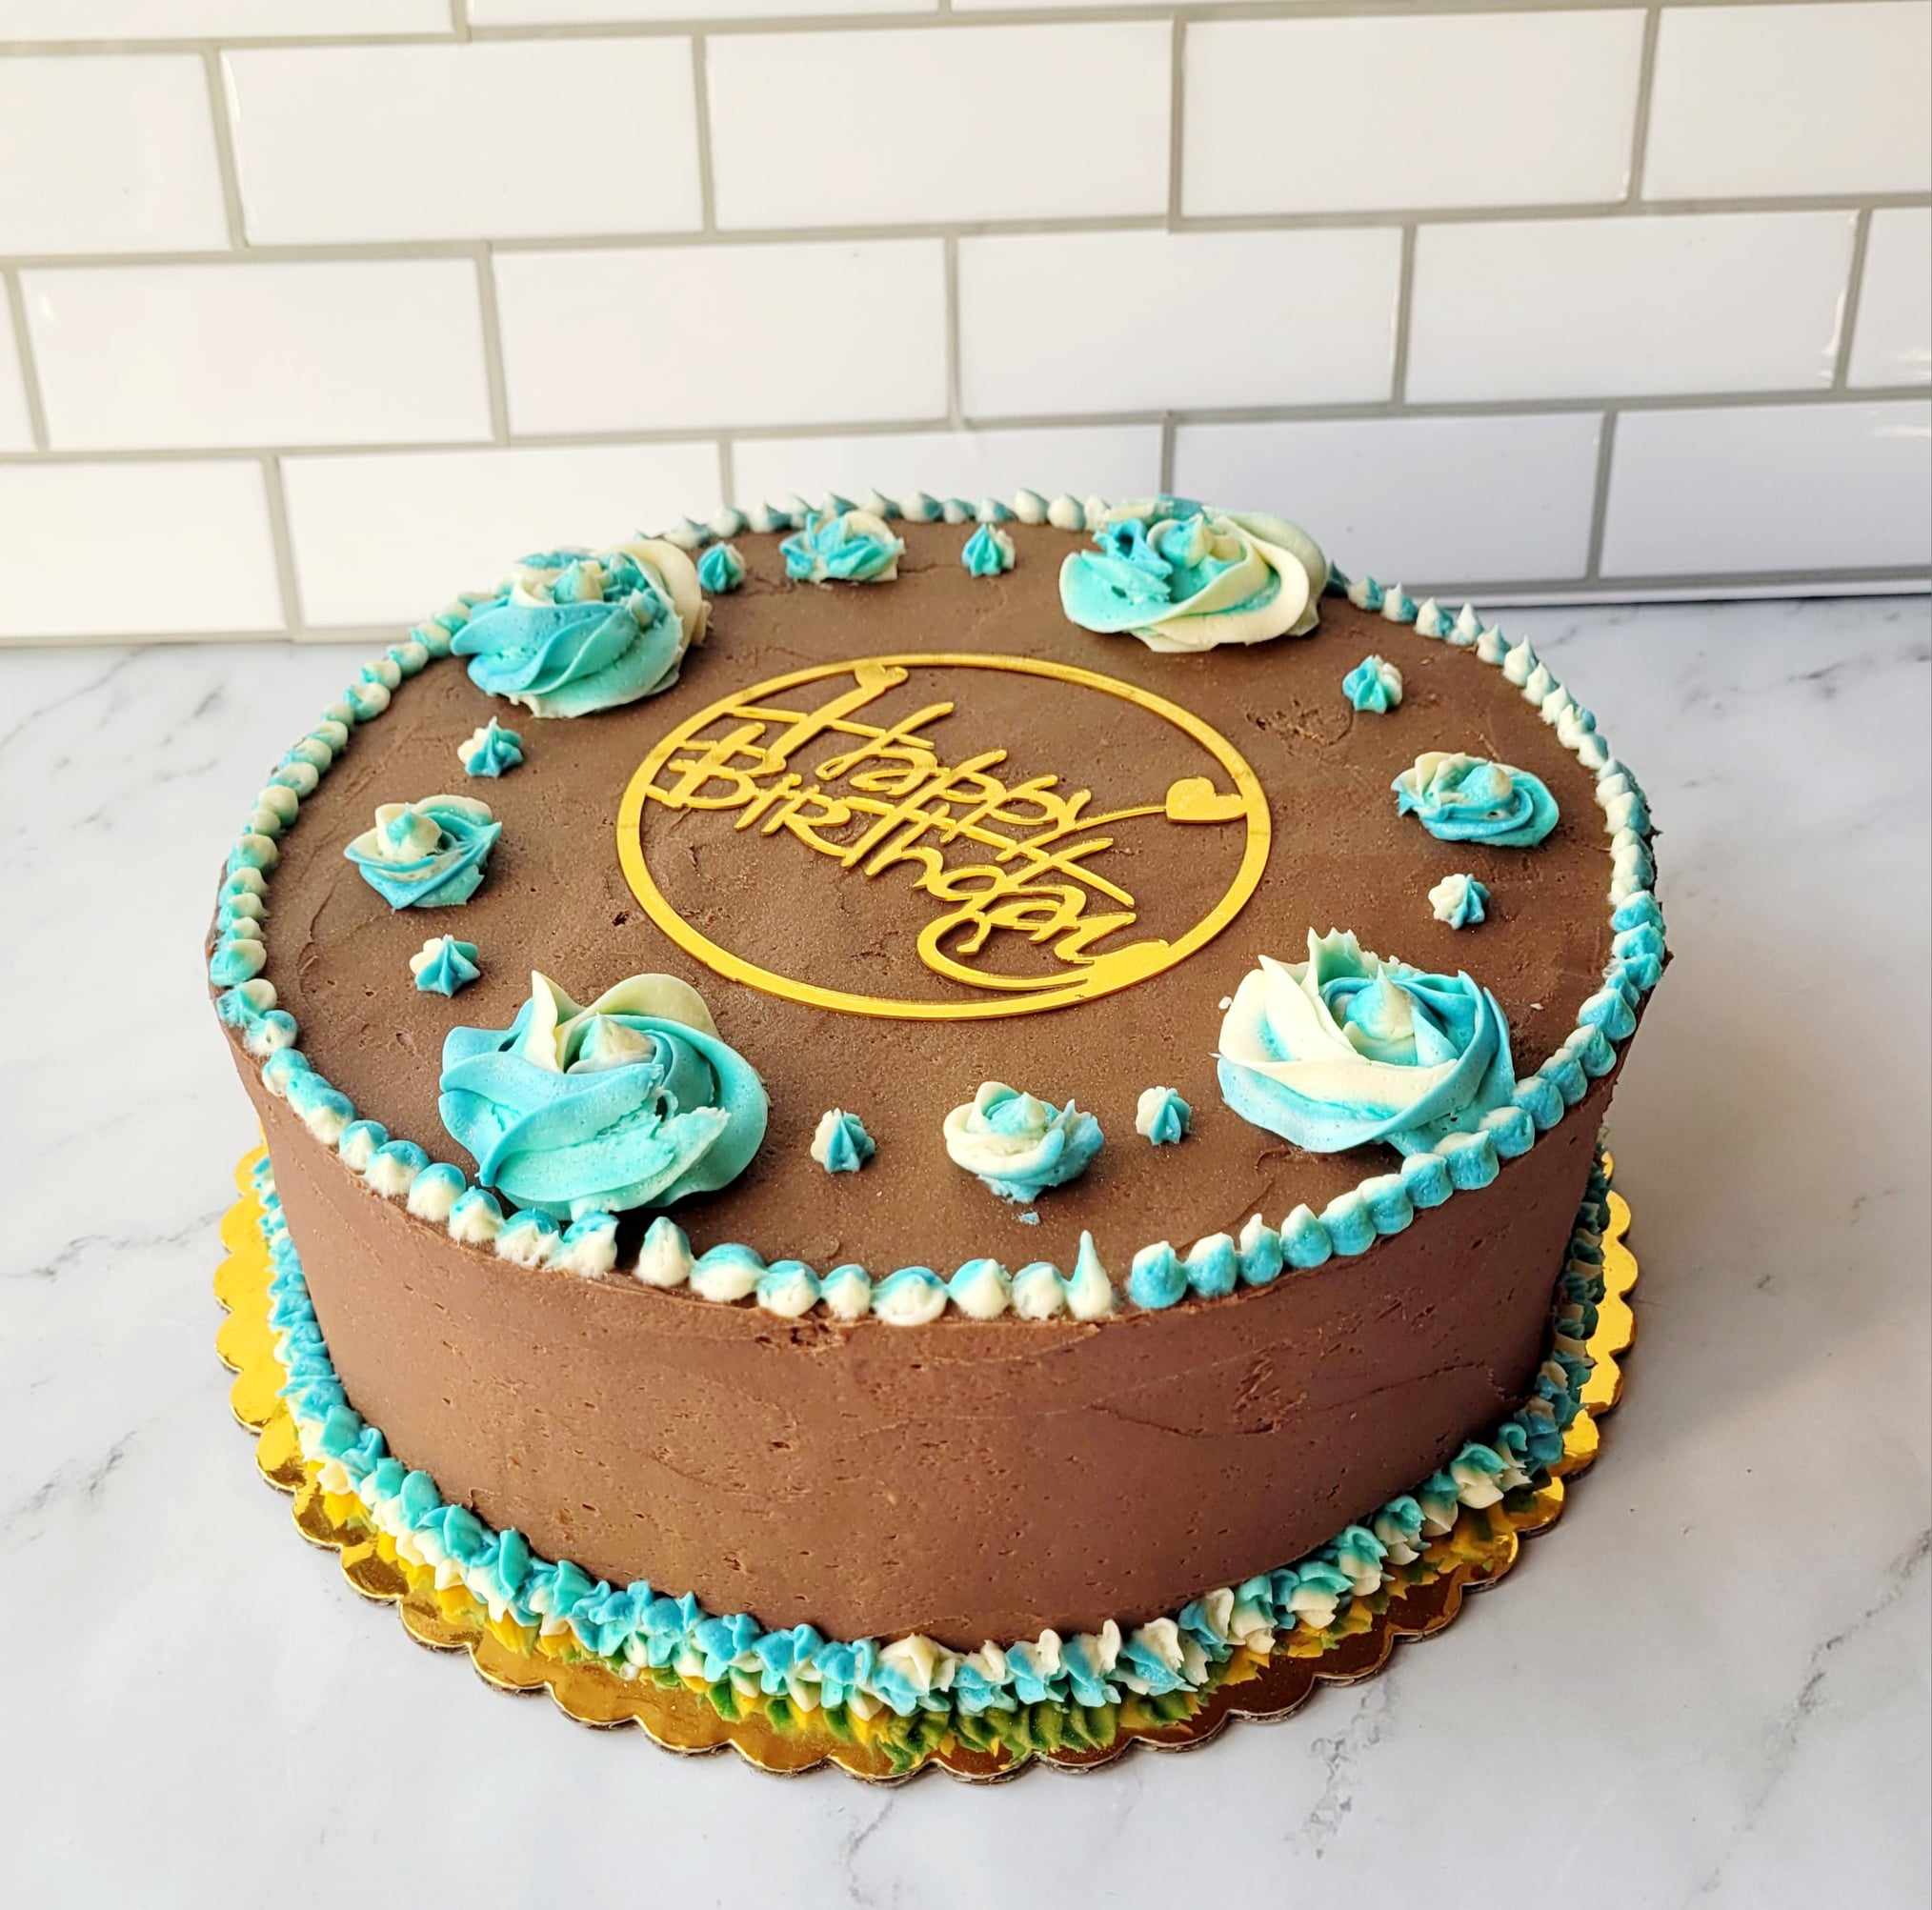 A decadent 9 inch 2 layer chocolate buttercream cake iced with small and large rosettes done win white and blue vanilla buttercream.